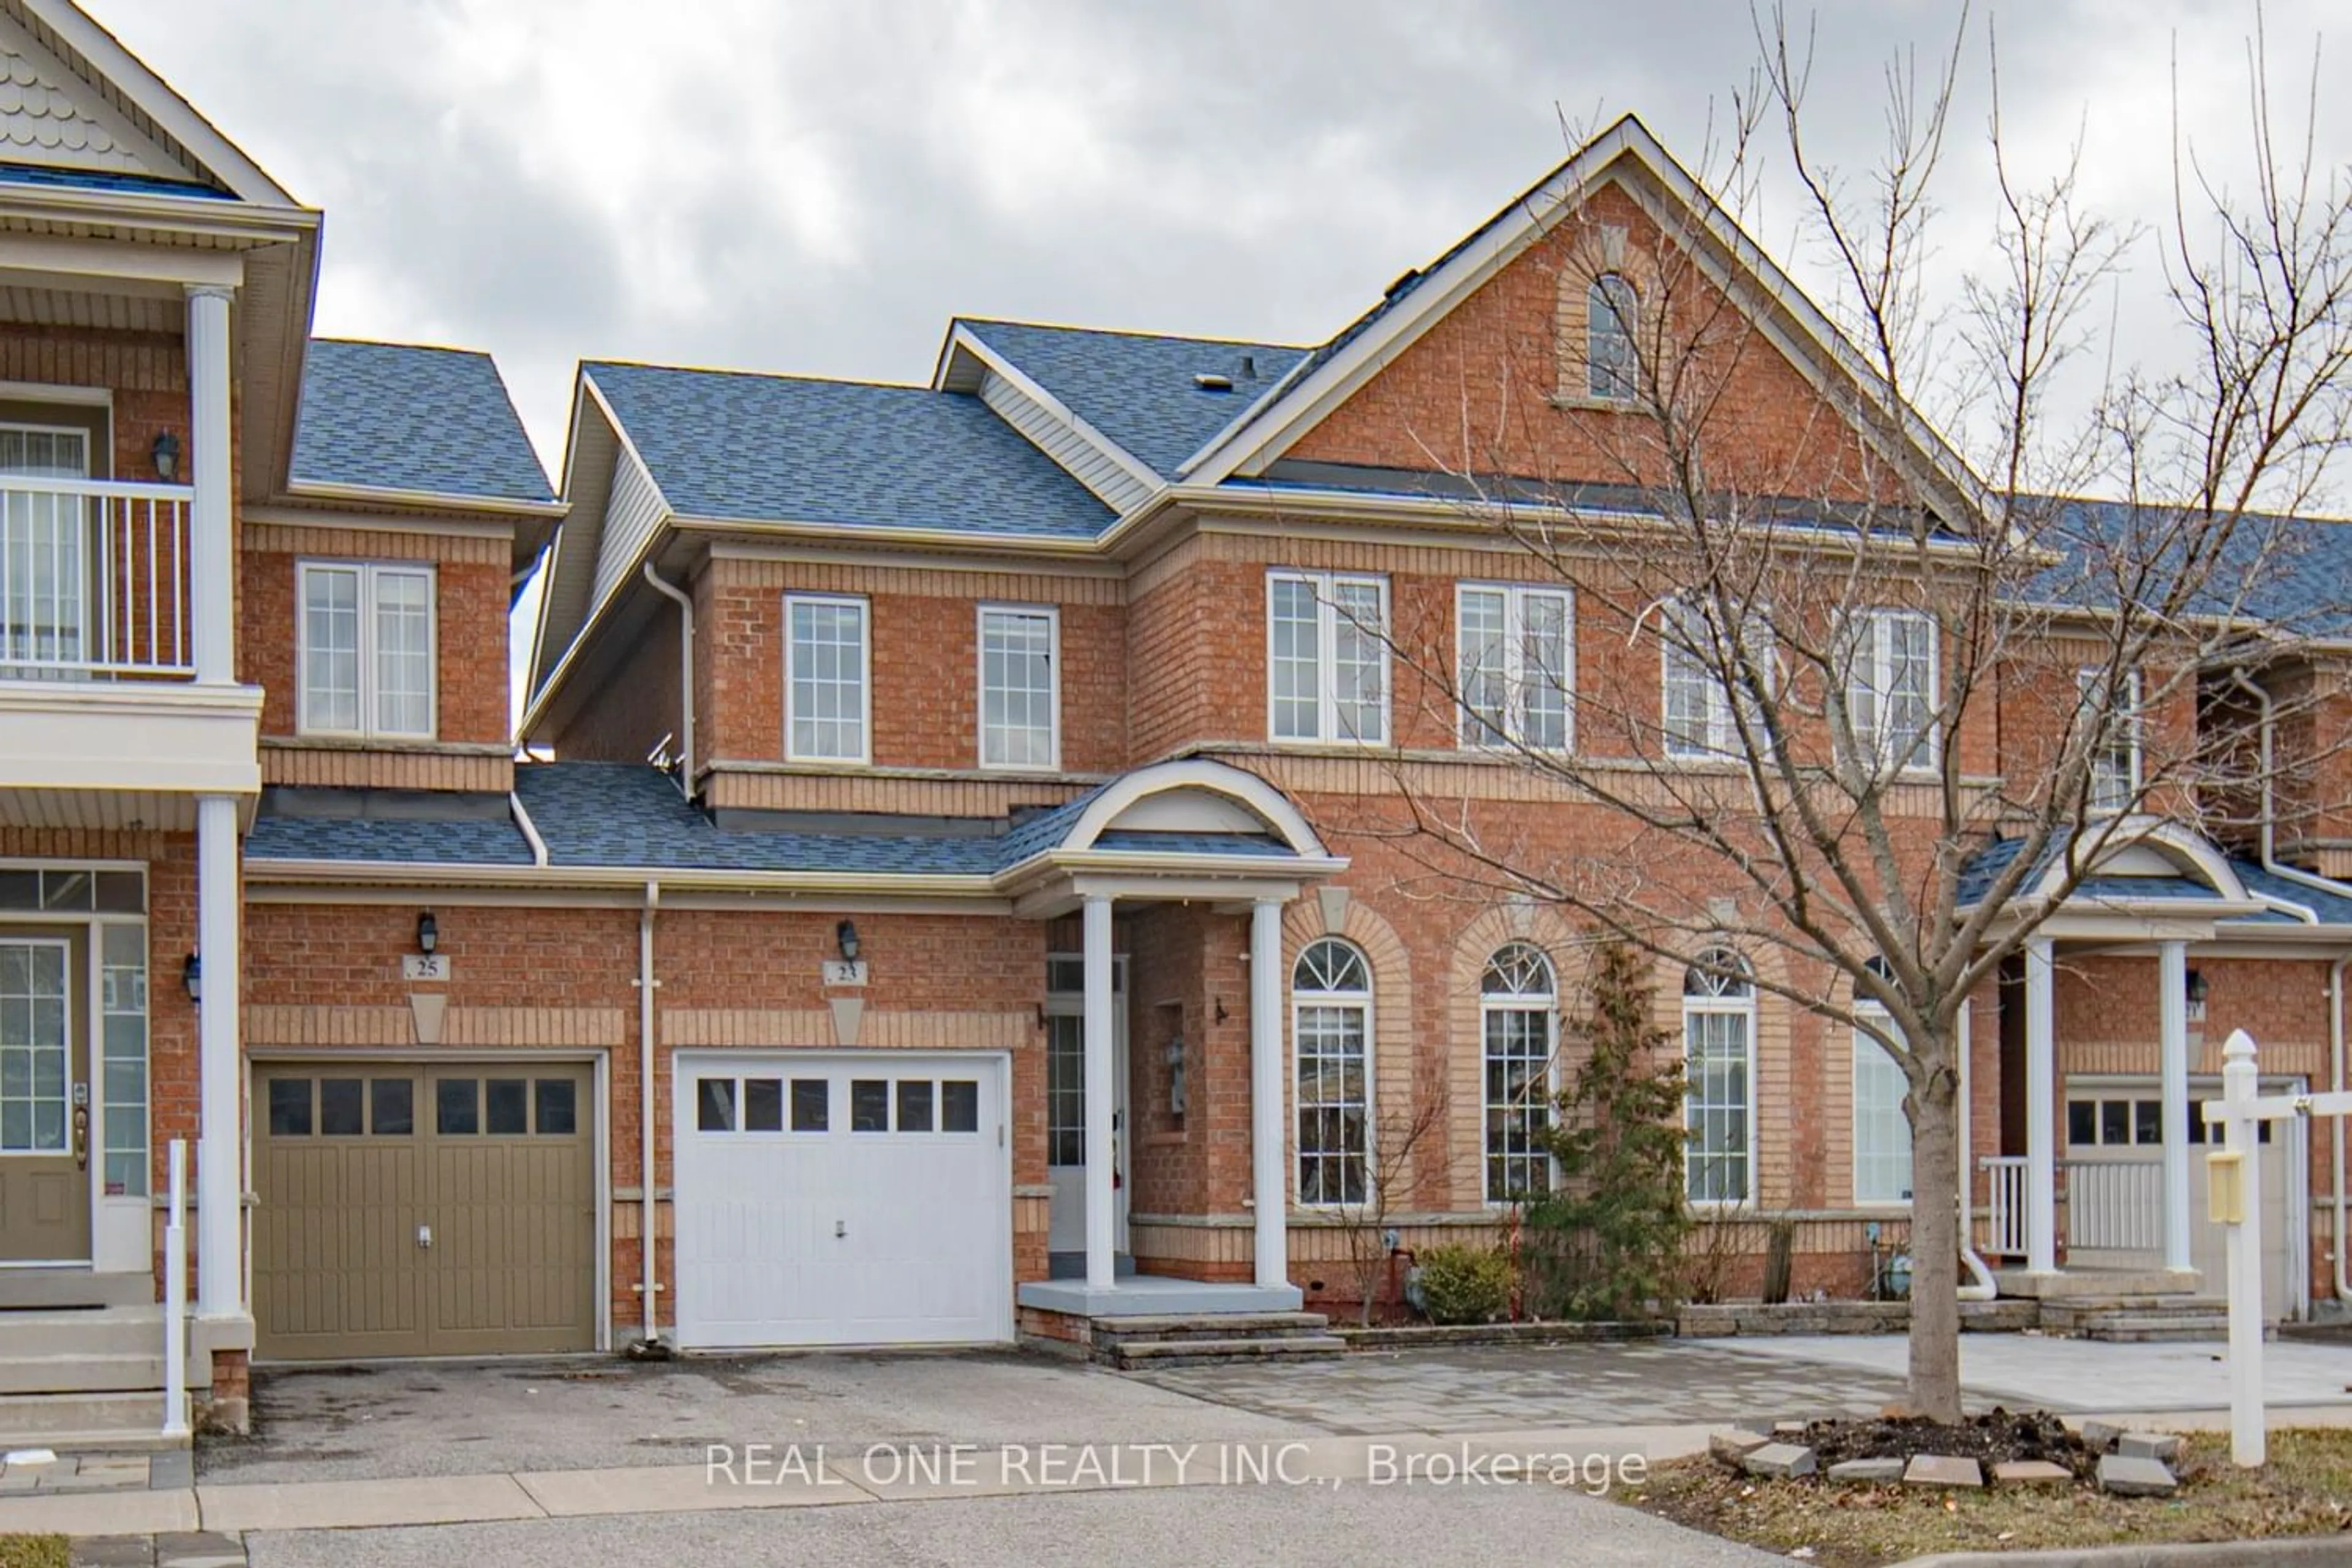 Home with brick exterior material for 23 Rizal Ave, Markham Ontario L6B 0L1